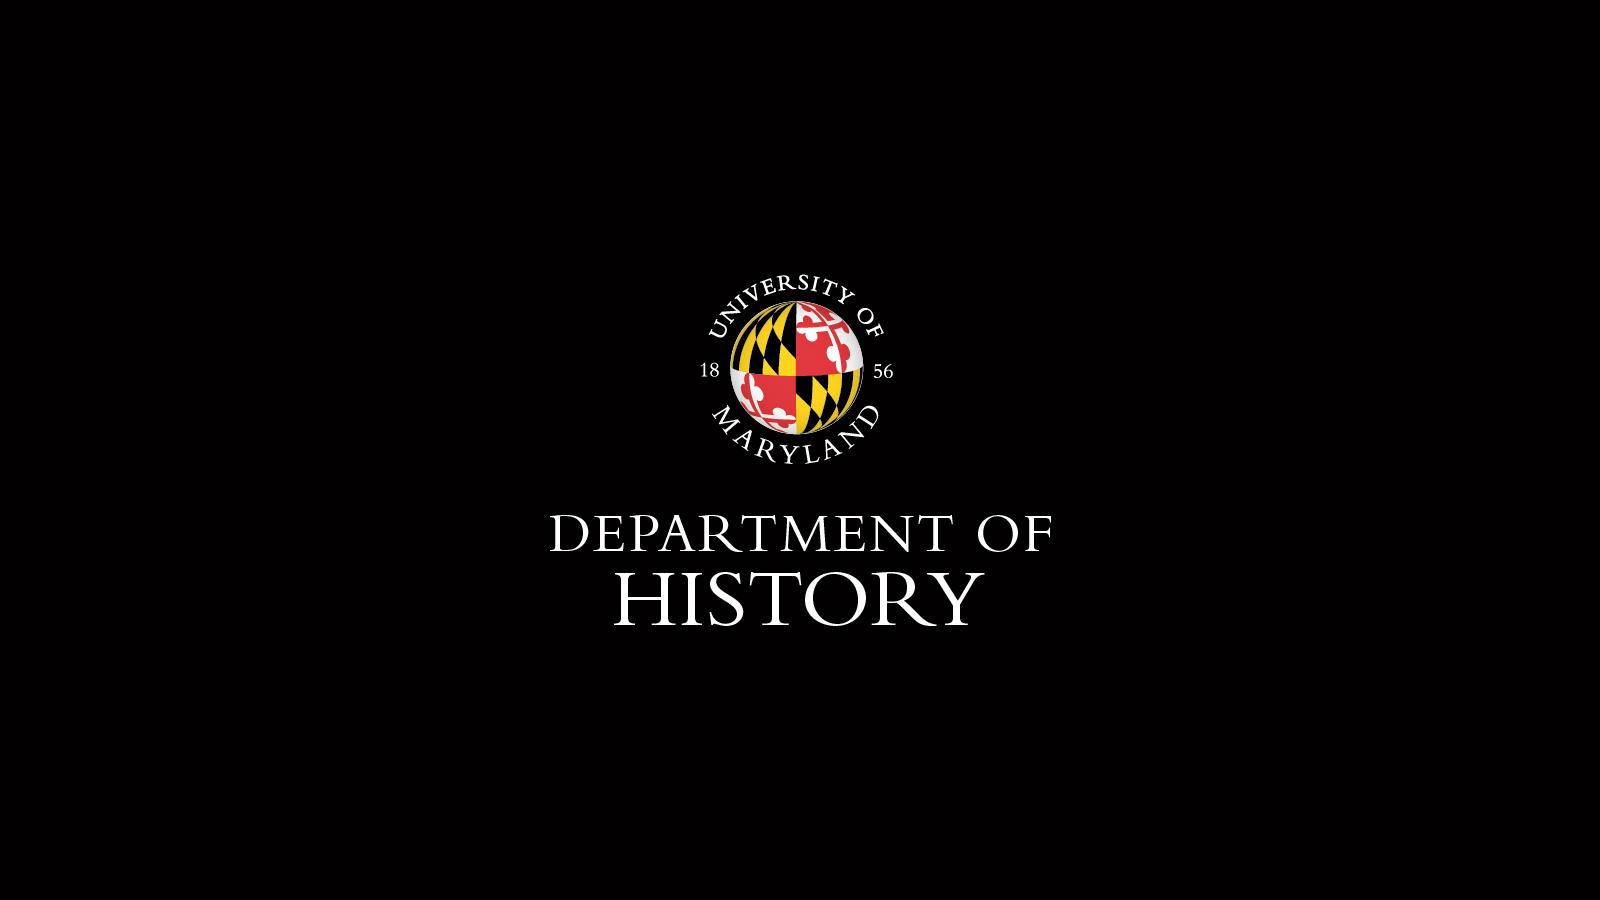 The Department of History at the University of Maryland logo against a black background